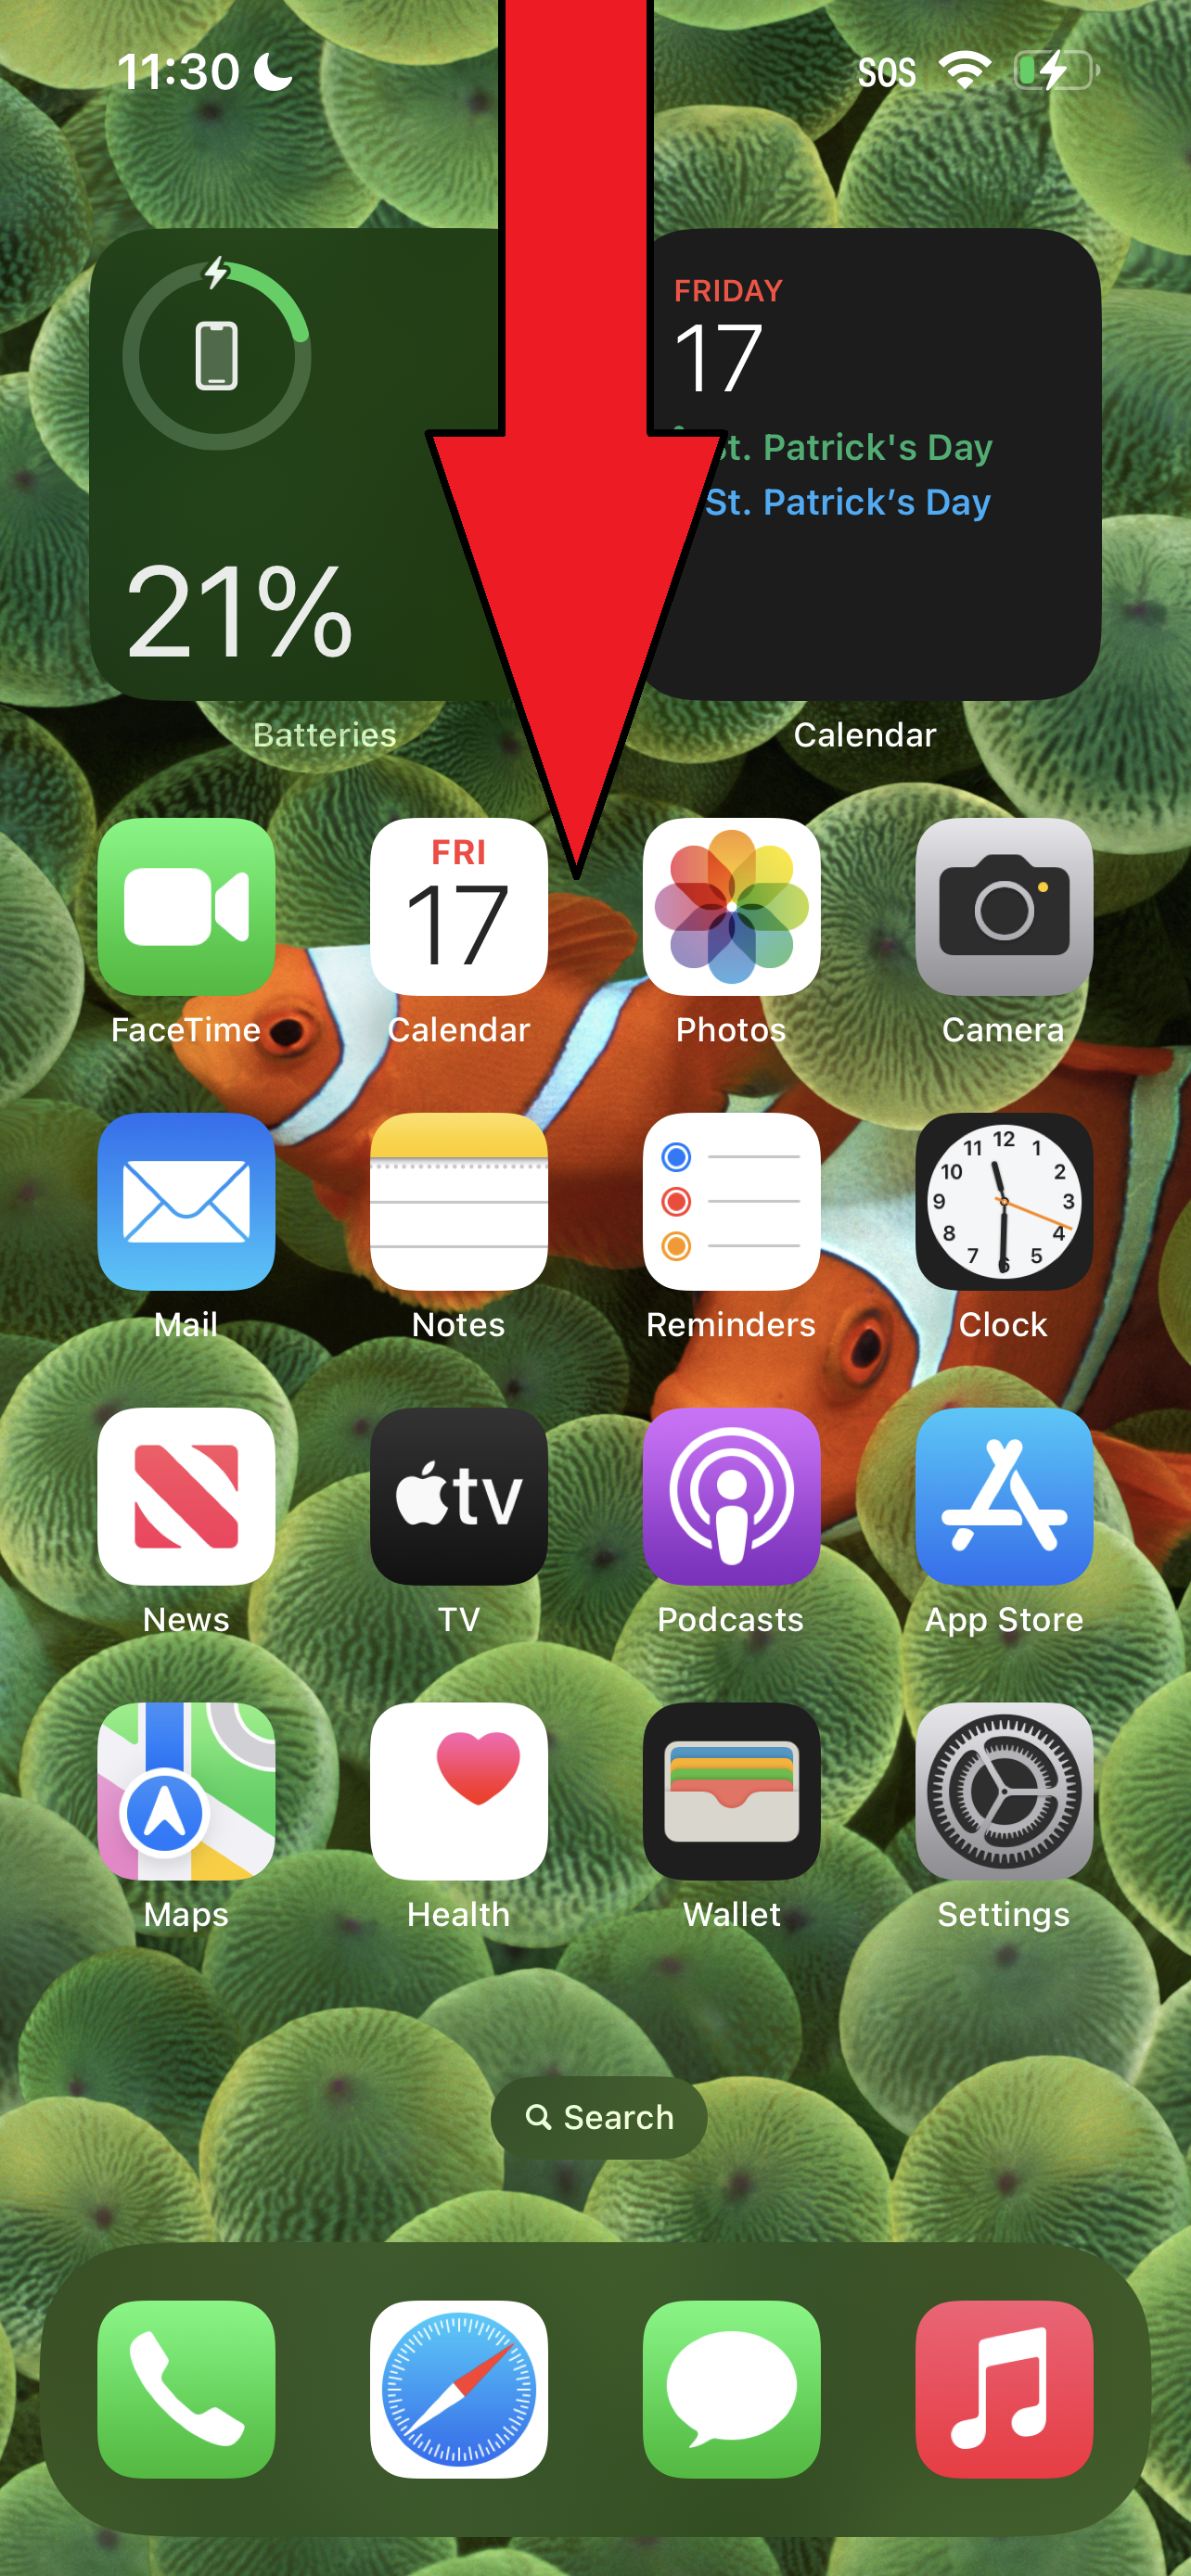 How to delete wallpaper on iPhone